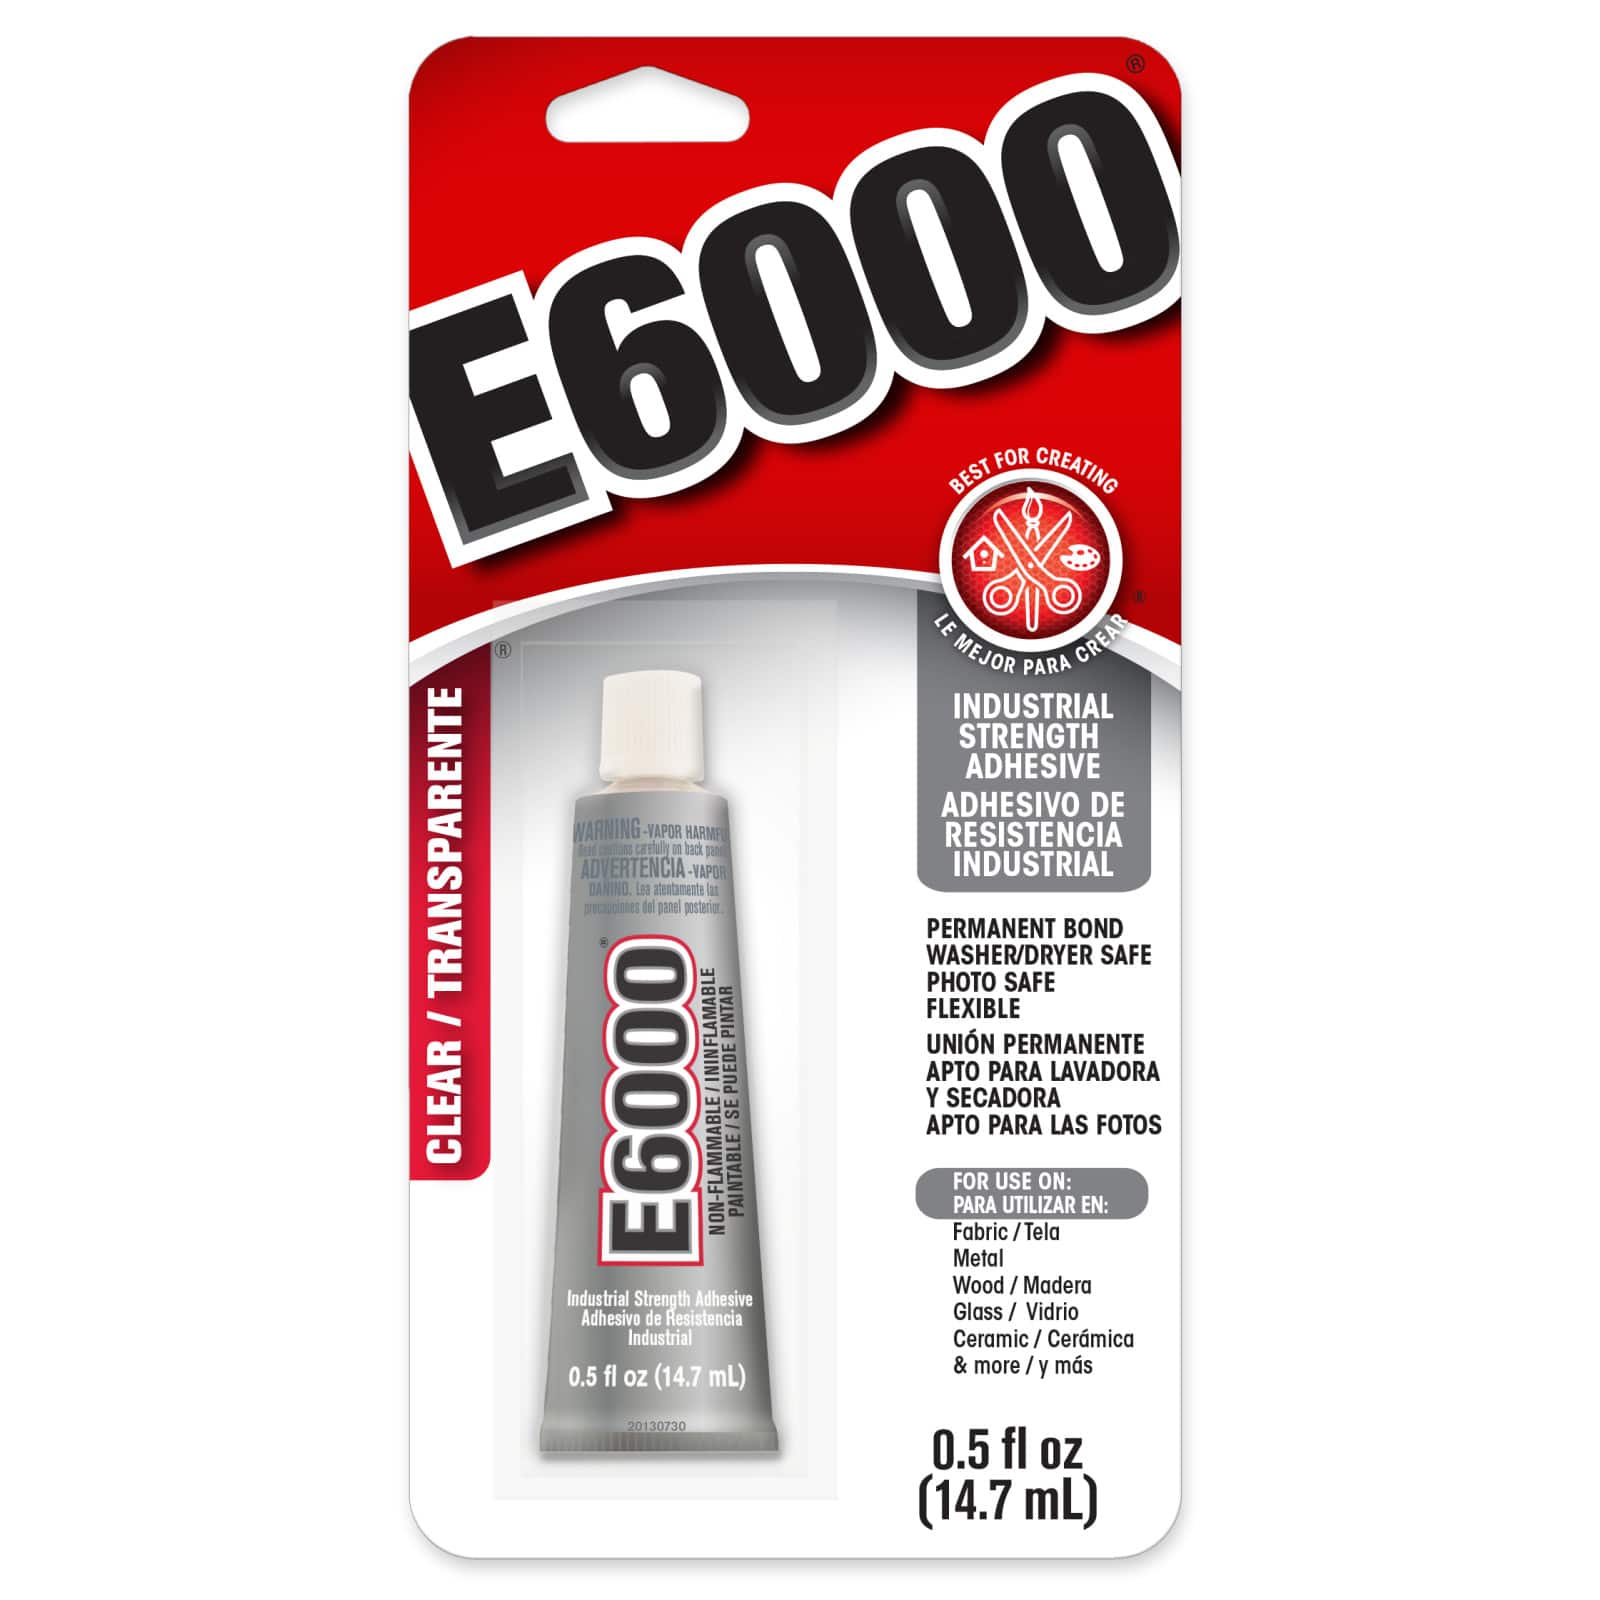 Which Types of E6000 do you use?